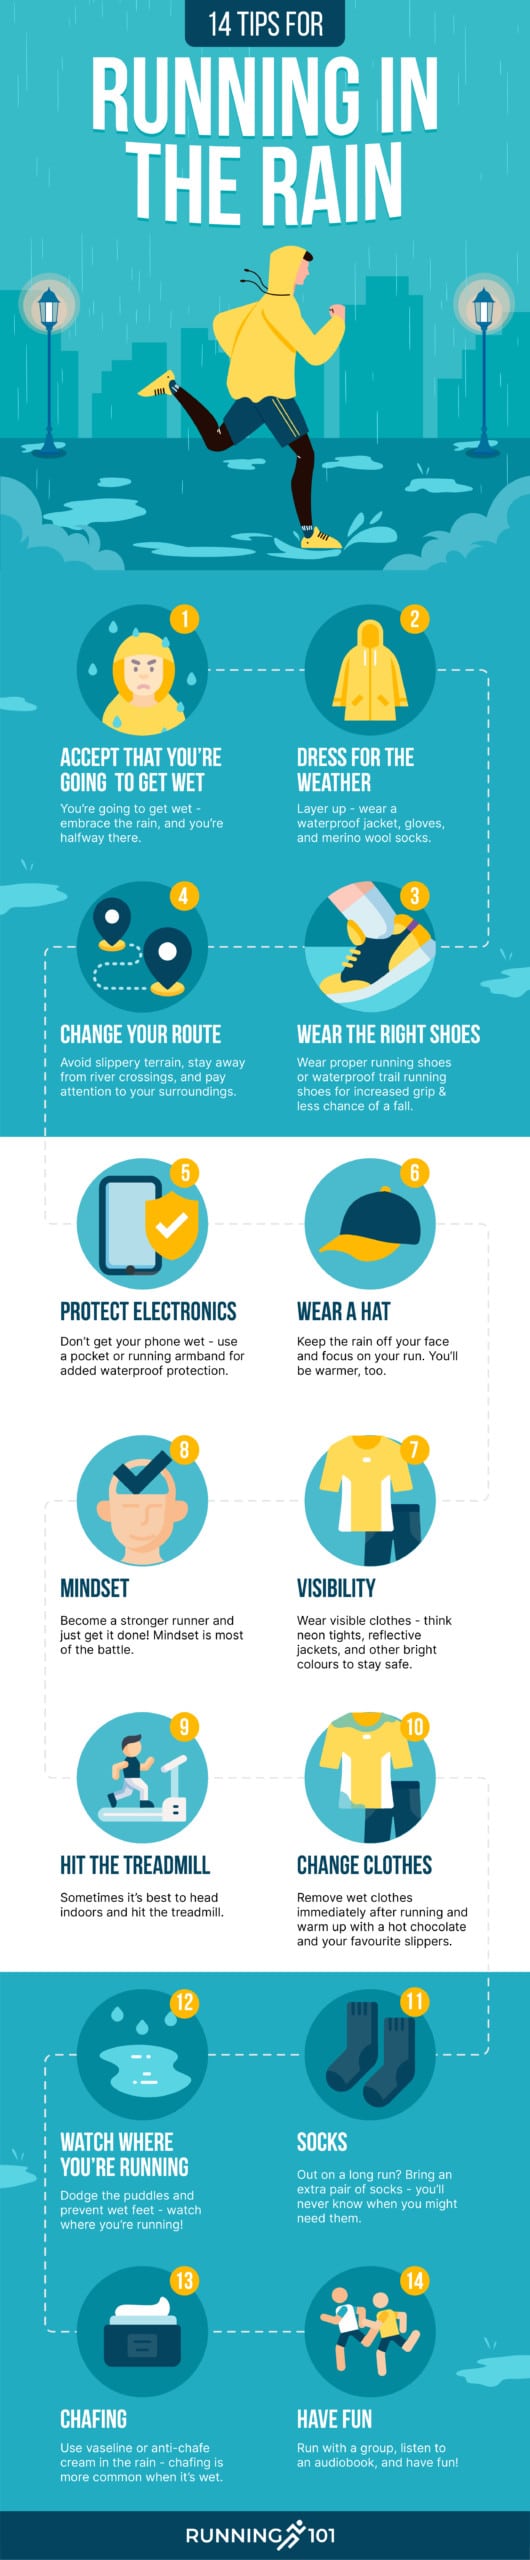 14 tips for running in the rain infographic